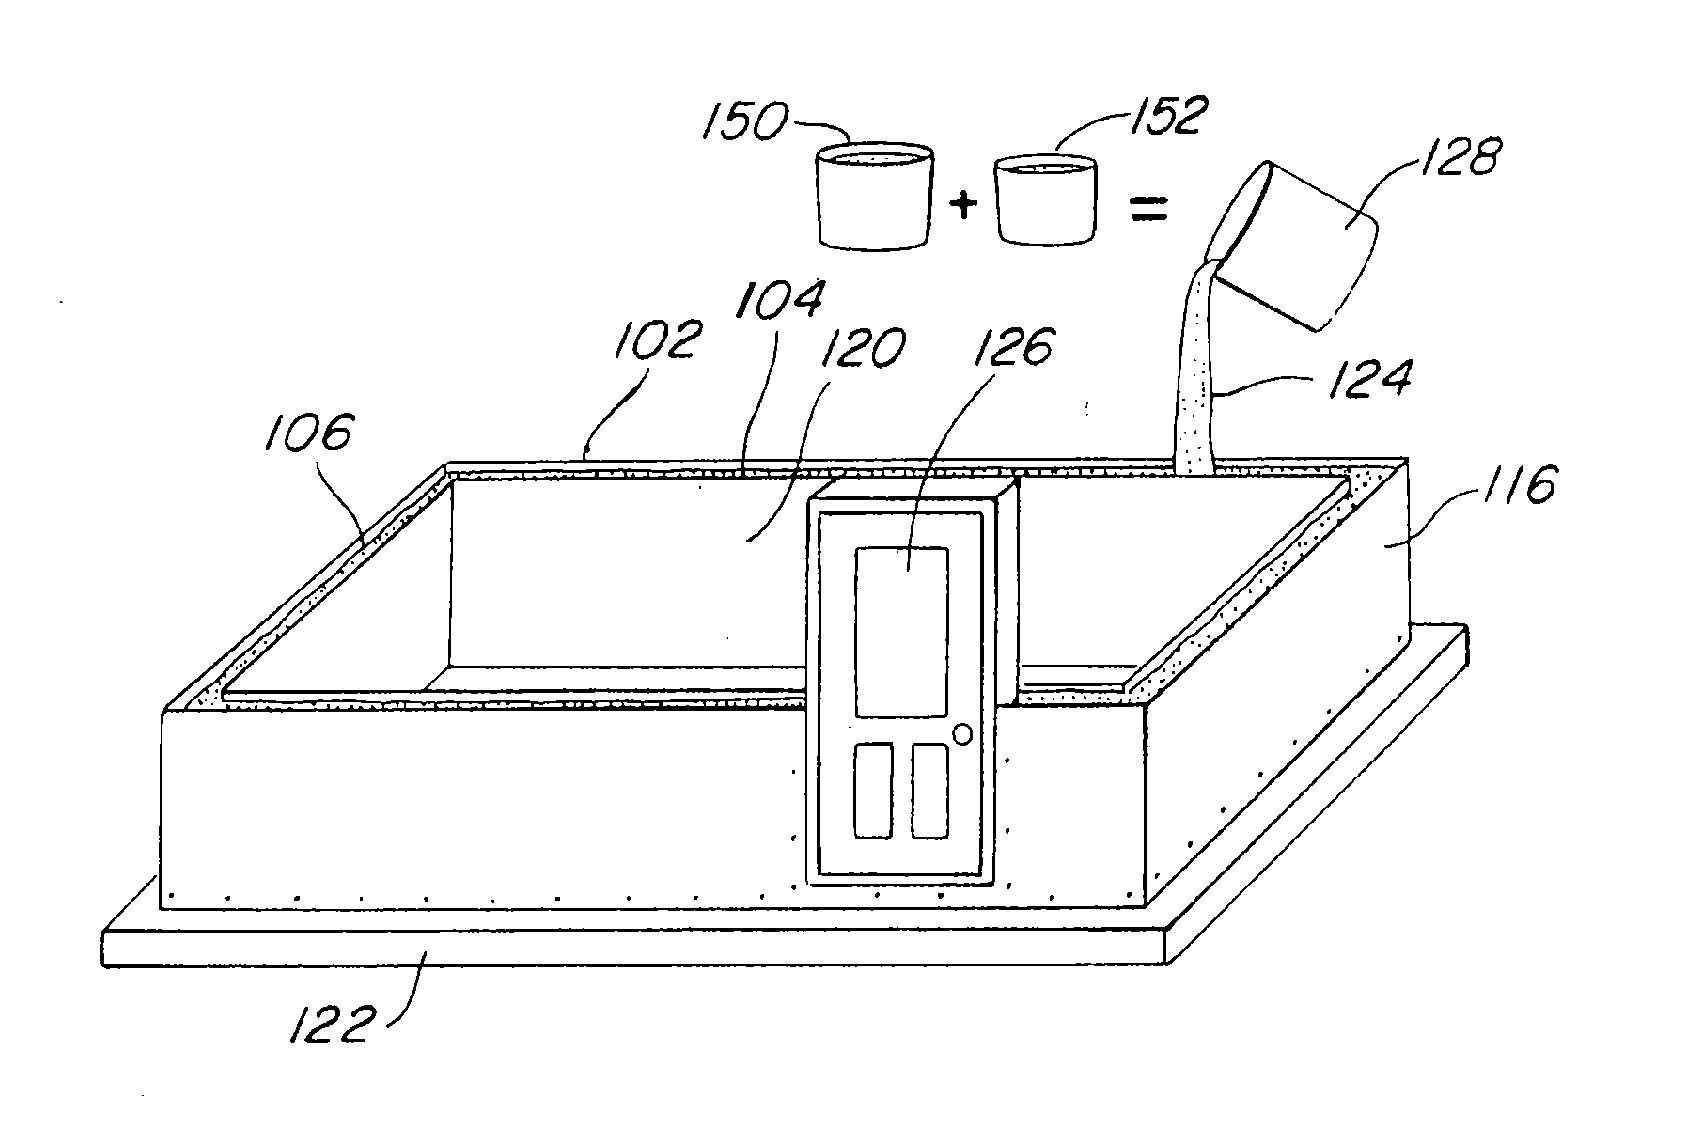 Method and system for a foldable structure employing material-filled panels